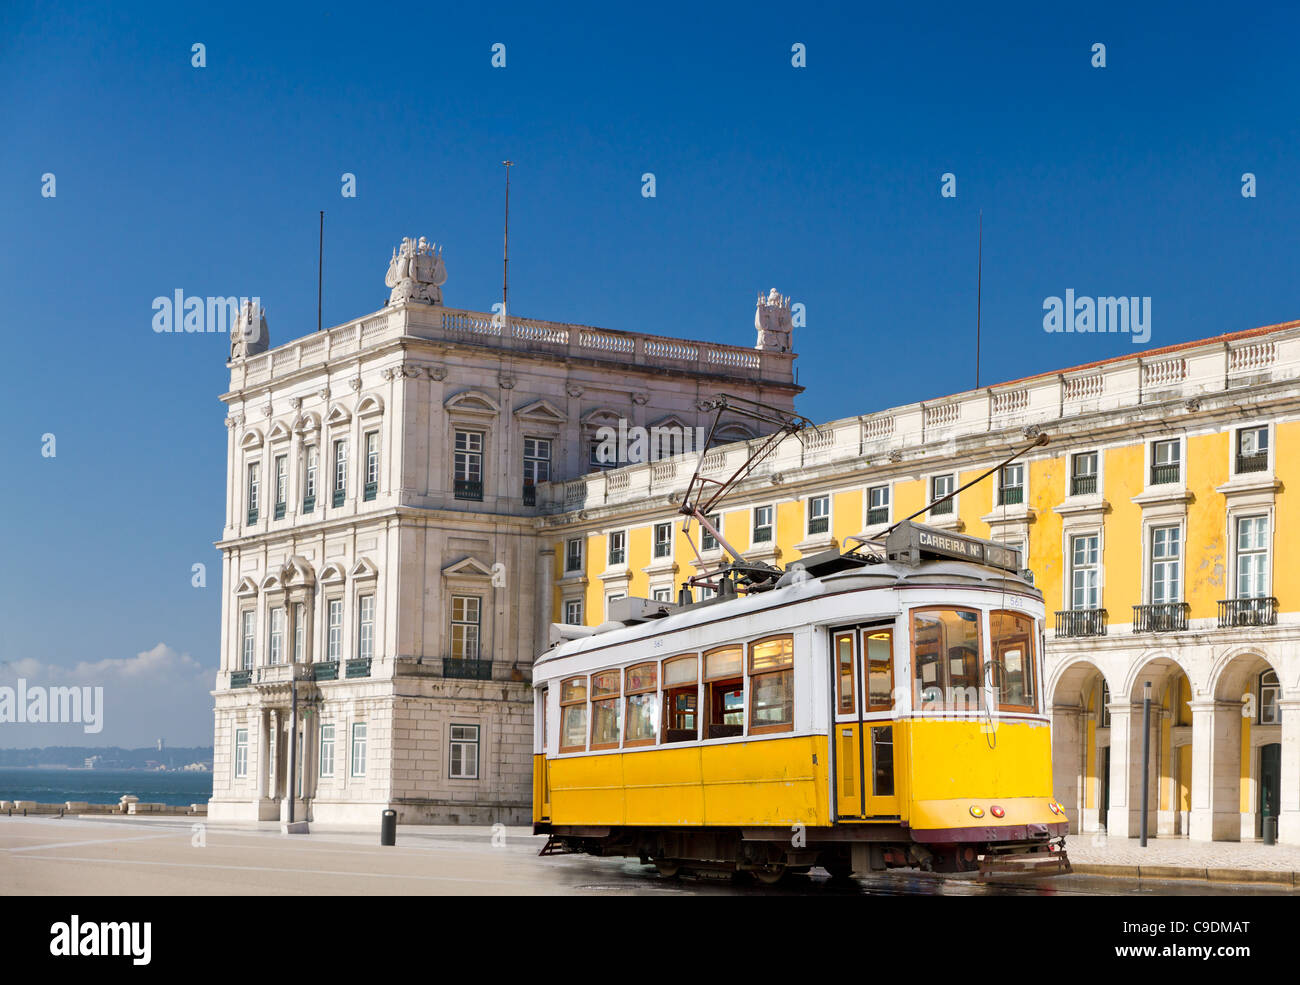 historic classic yellow tram of Lisbon built partially of wood in front of Lisbons central square Praca de Comercio, Portugal Stock Photo